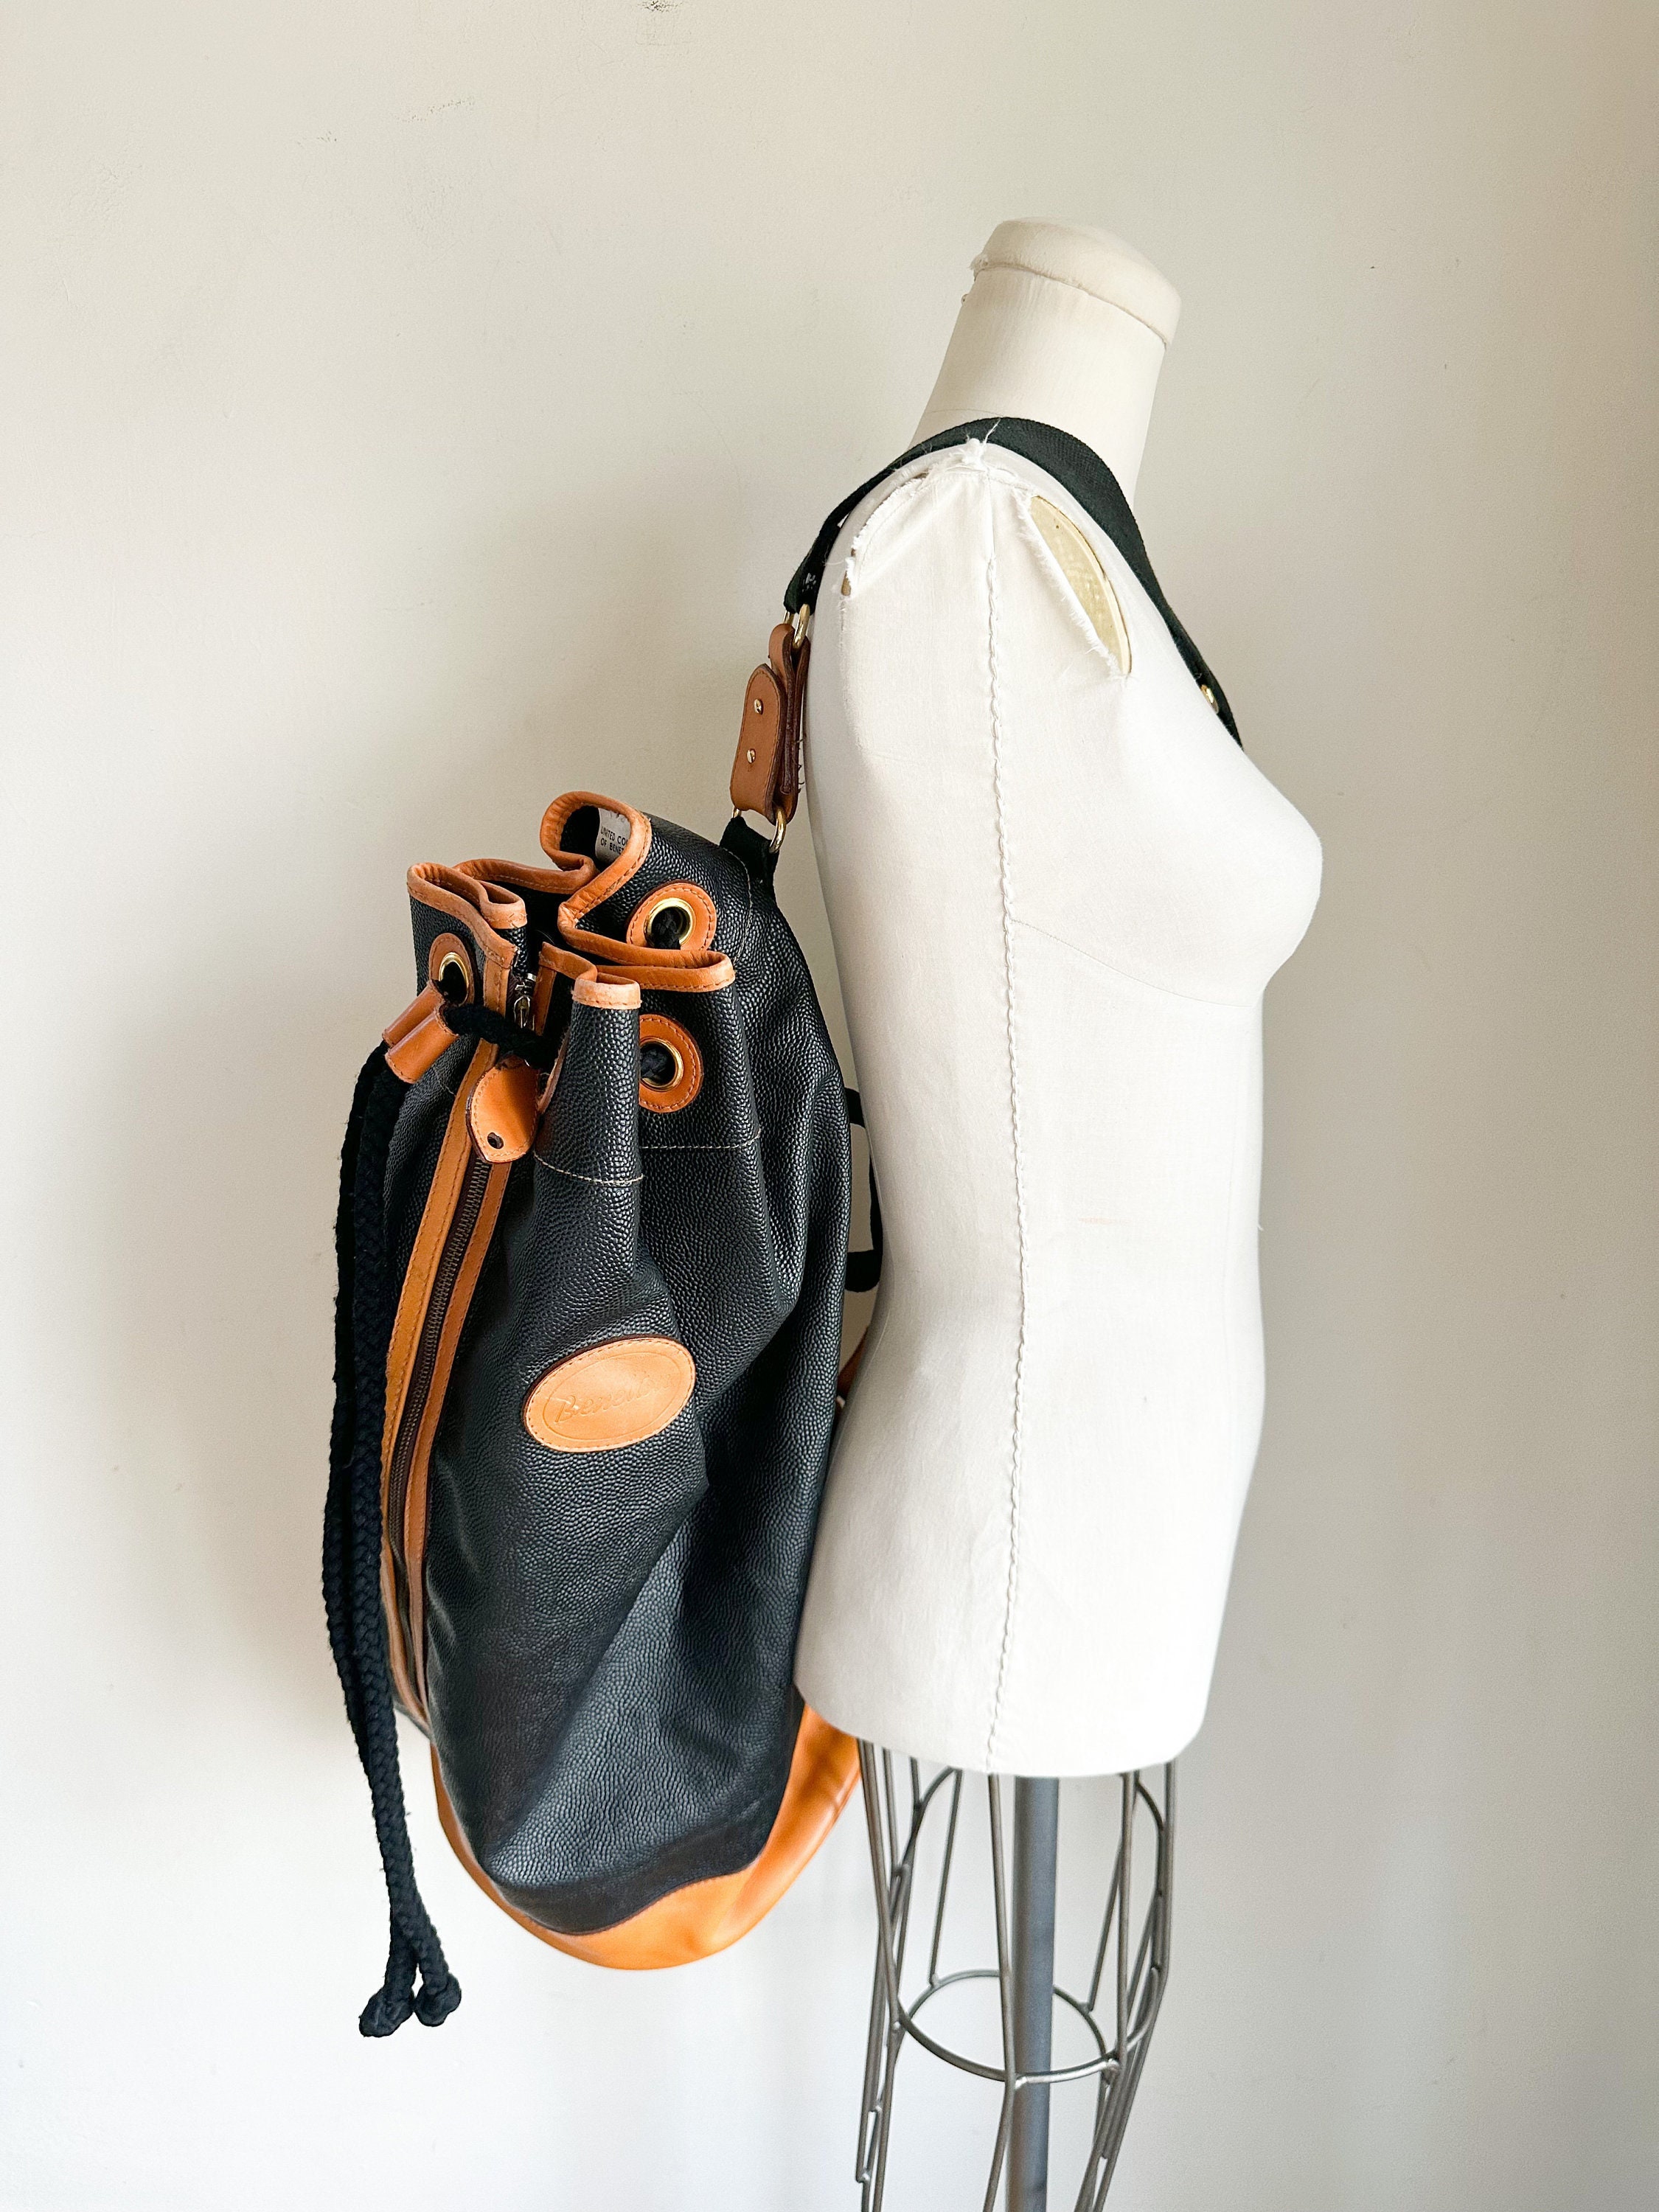 Madewell + The Canvas Foldover Backpack